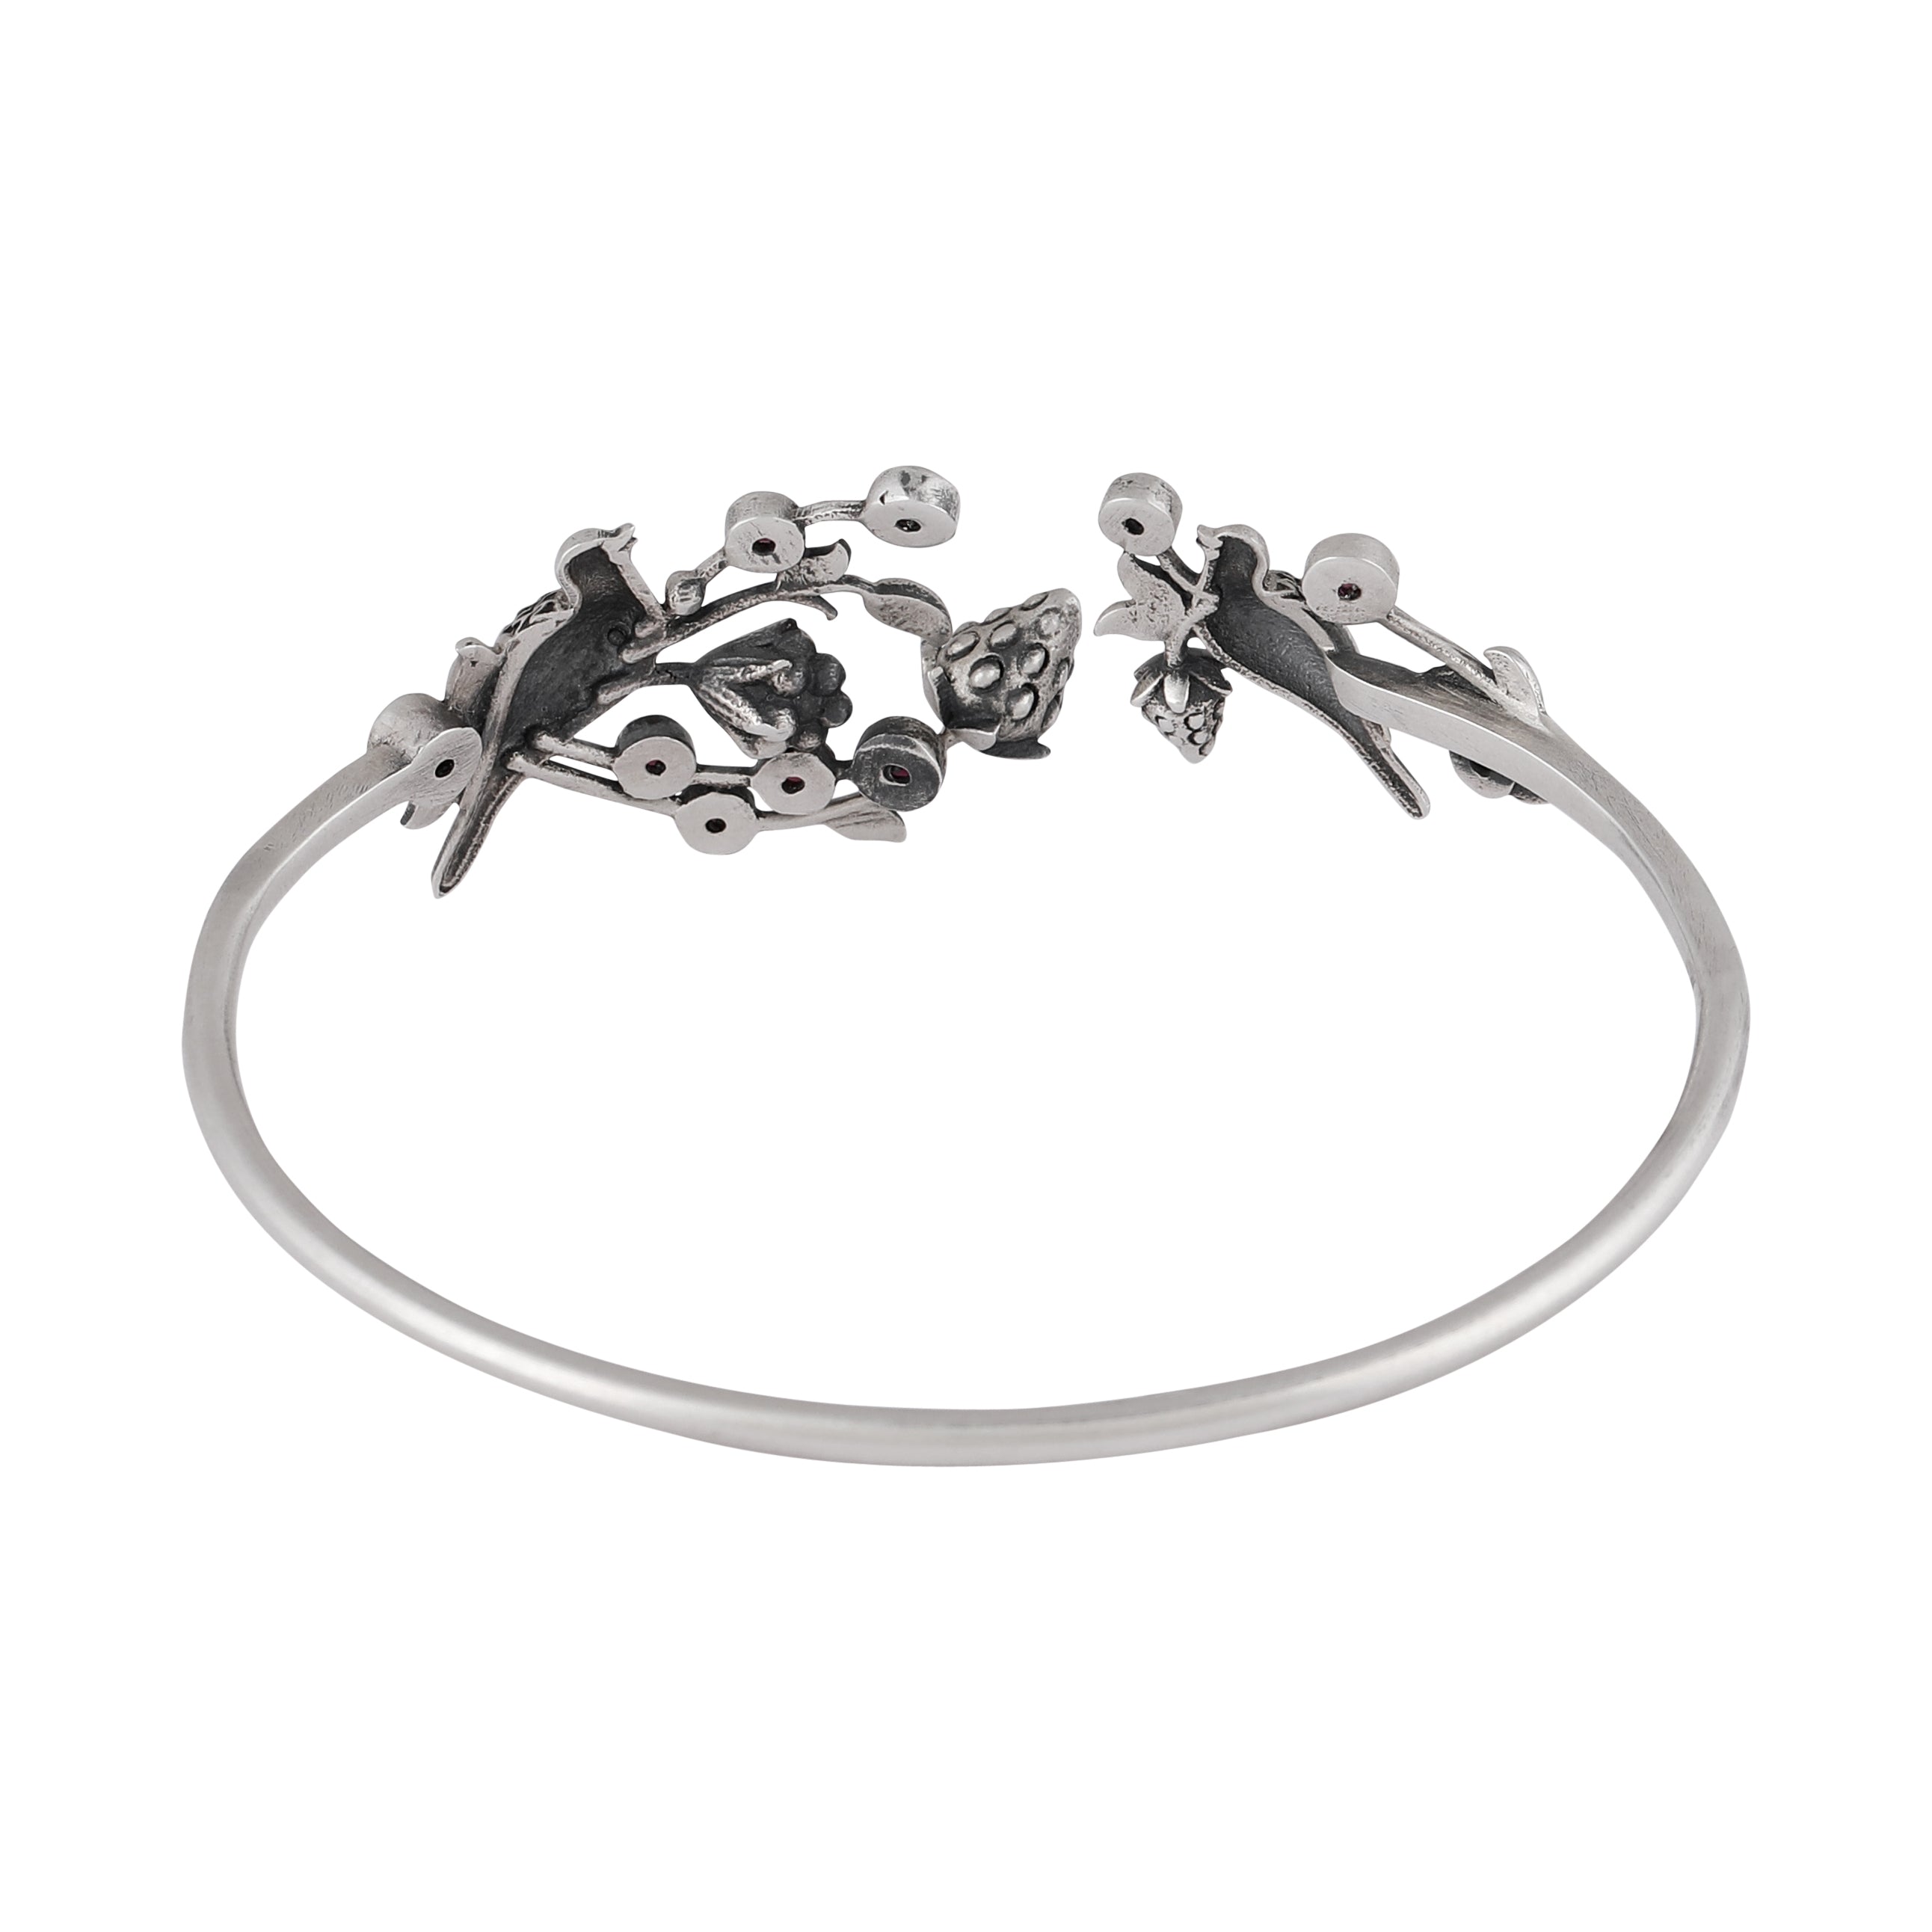 William Morris - Strawberry Thief Partner Silver Bangle by Moha